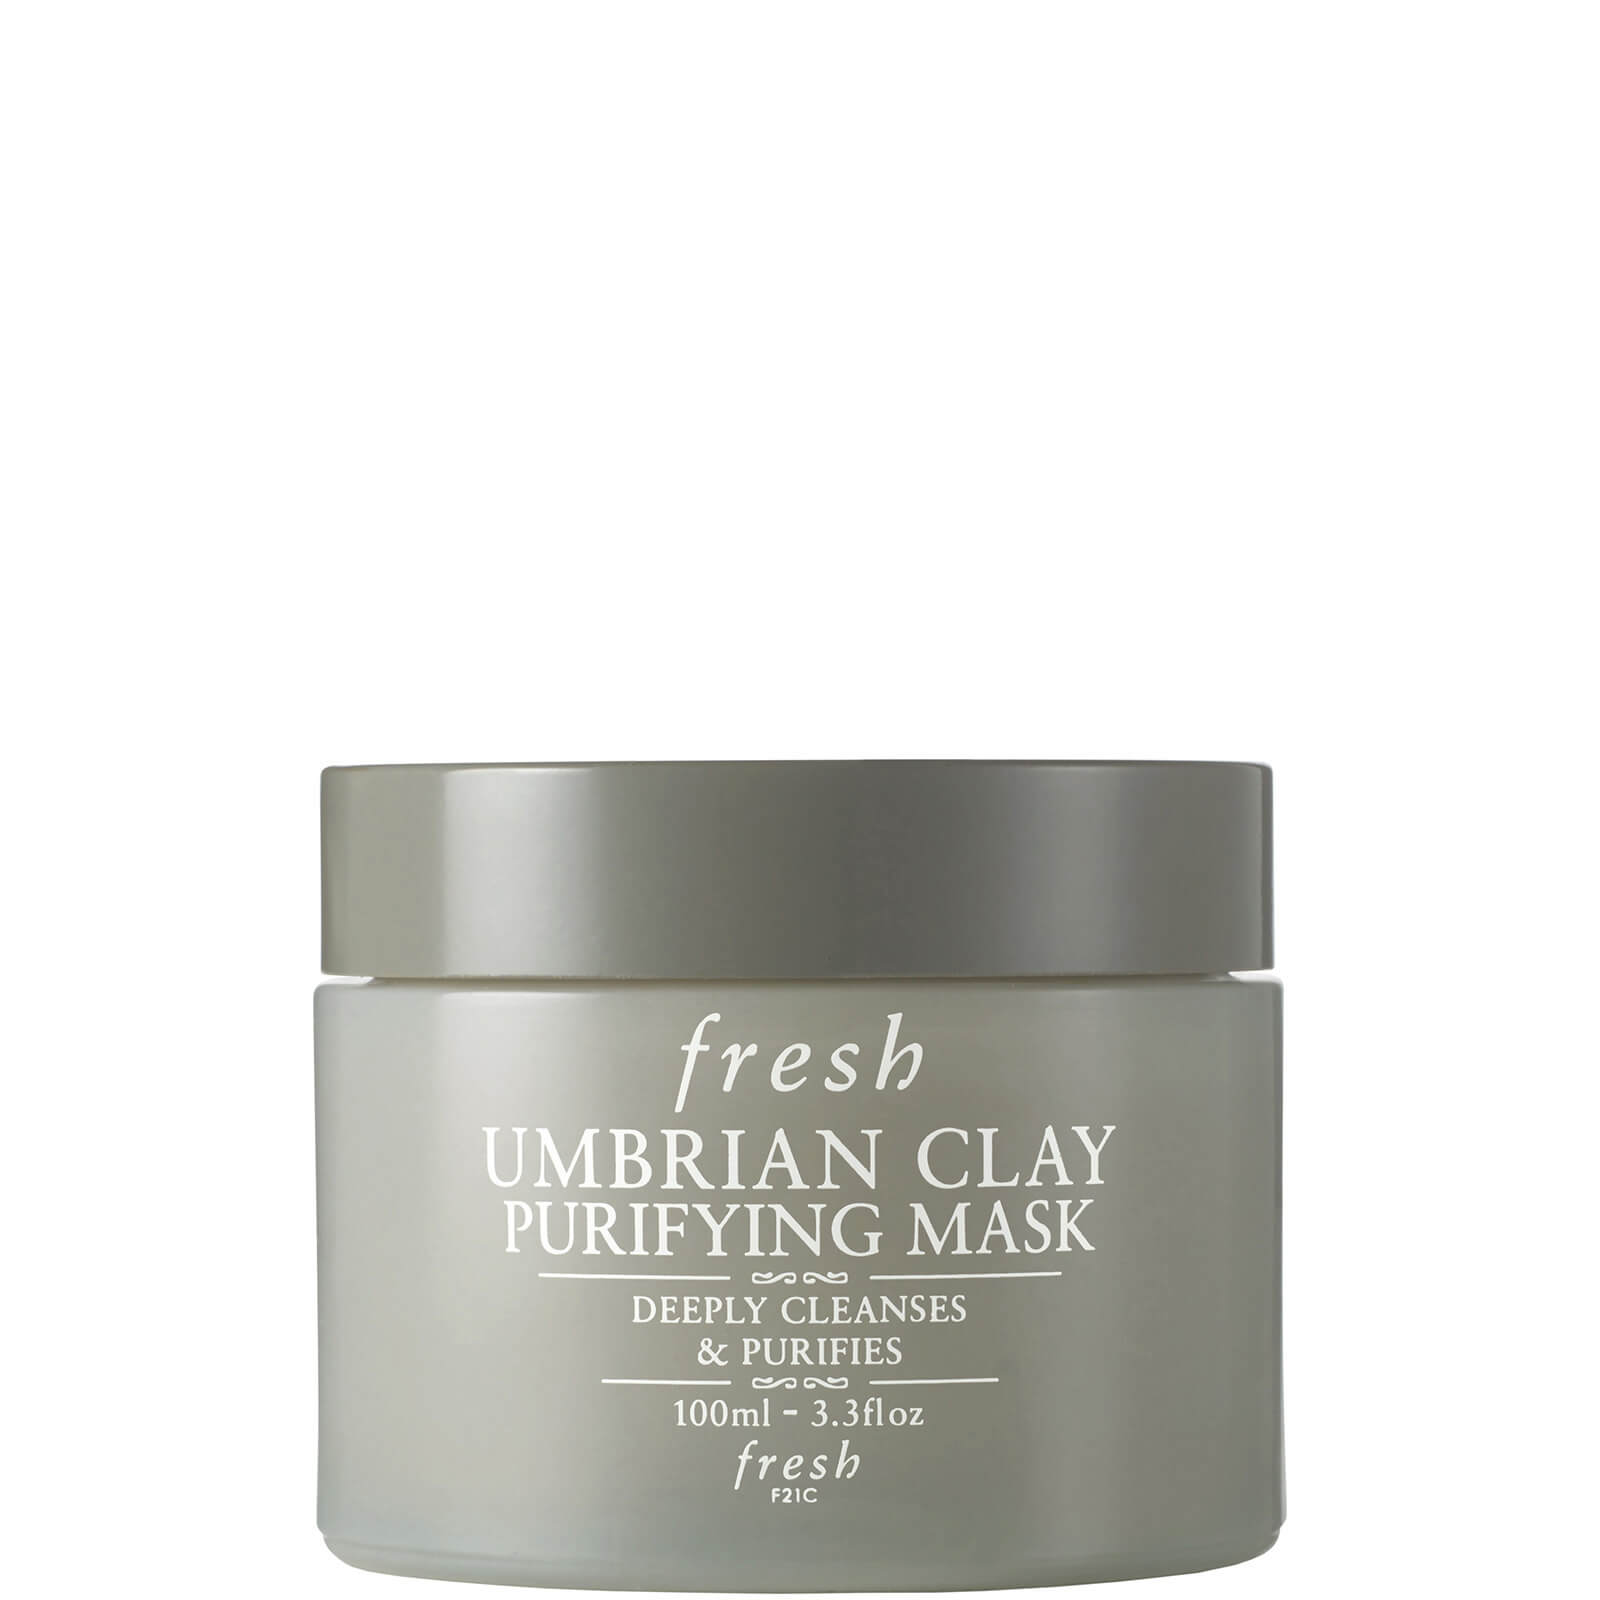 Fresh Umbrian Clay Pore-Purifying Face Mask (Various Sizes) - 100ml